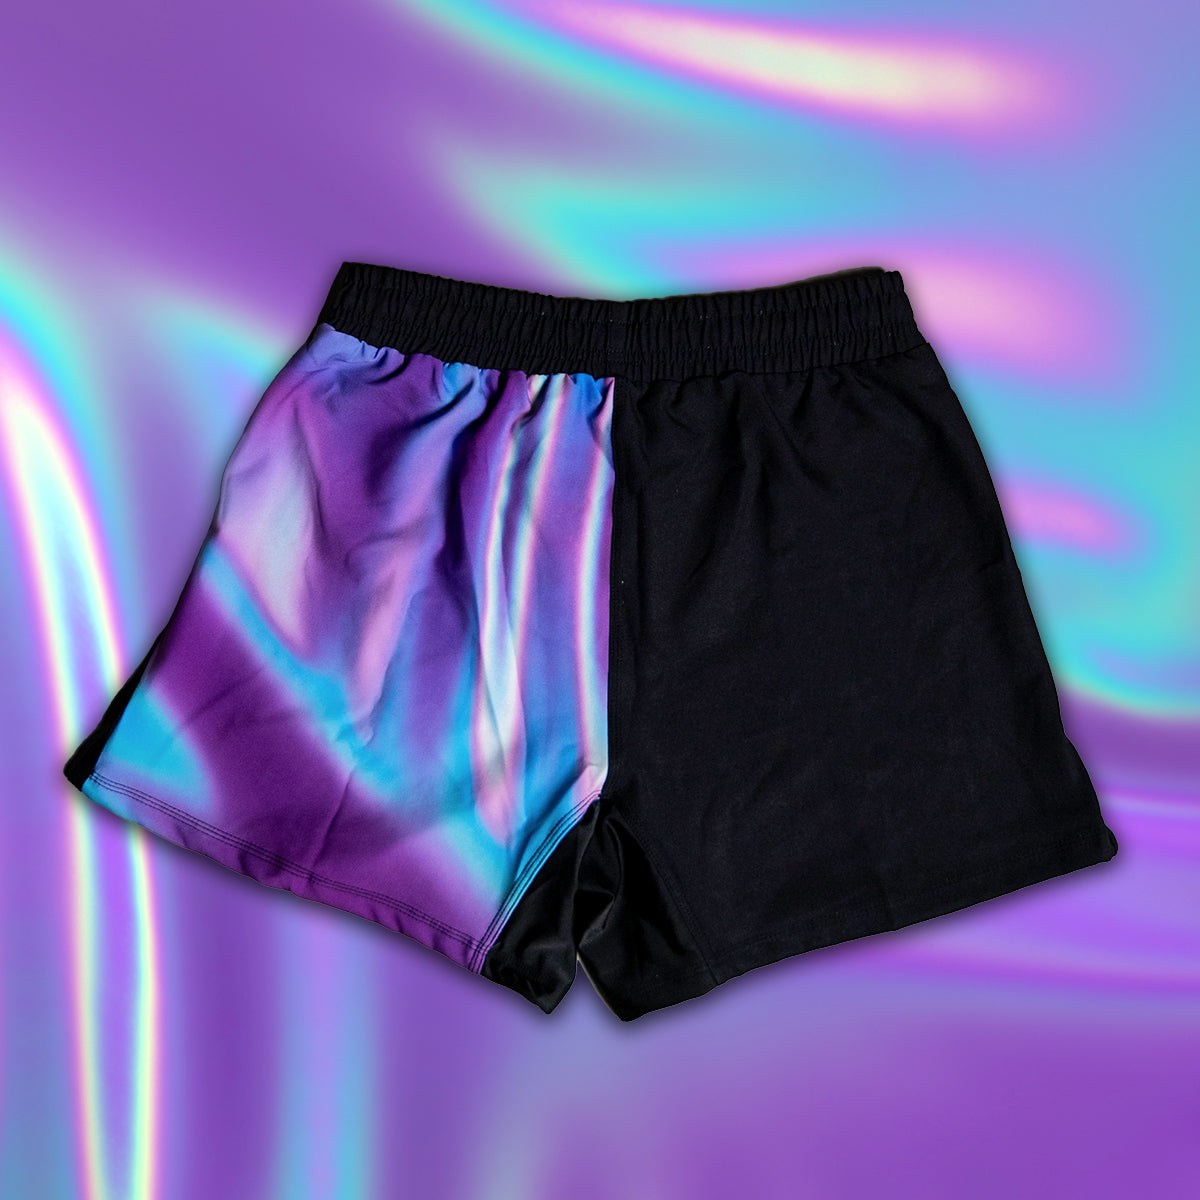 Holographic Grappling Shorts